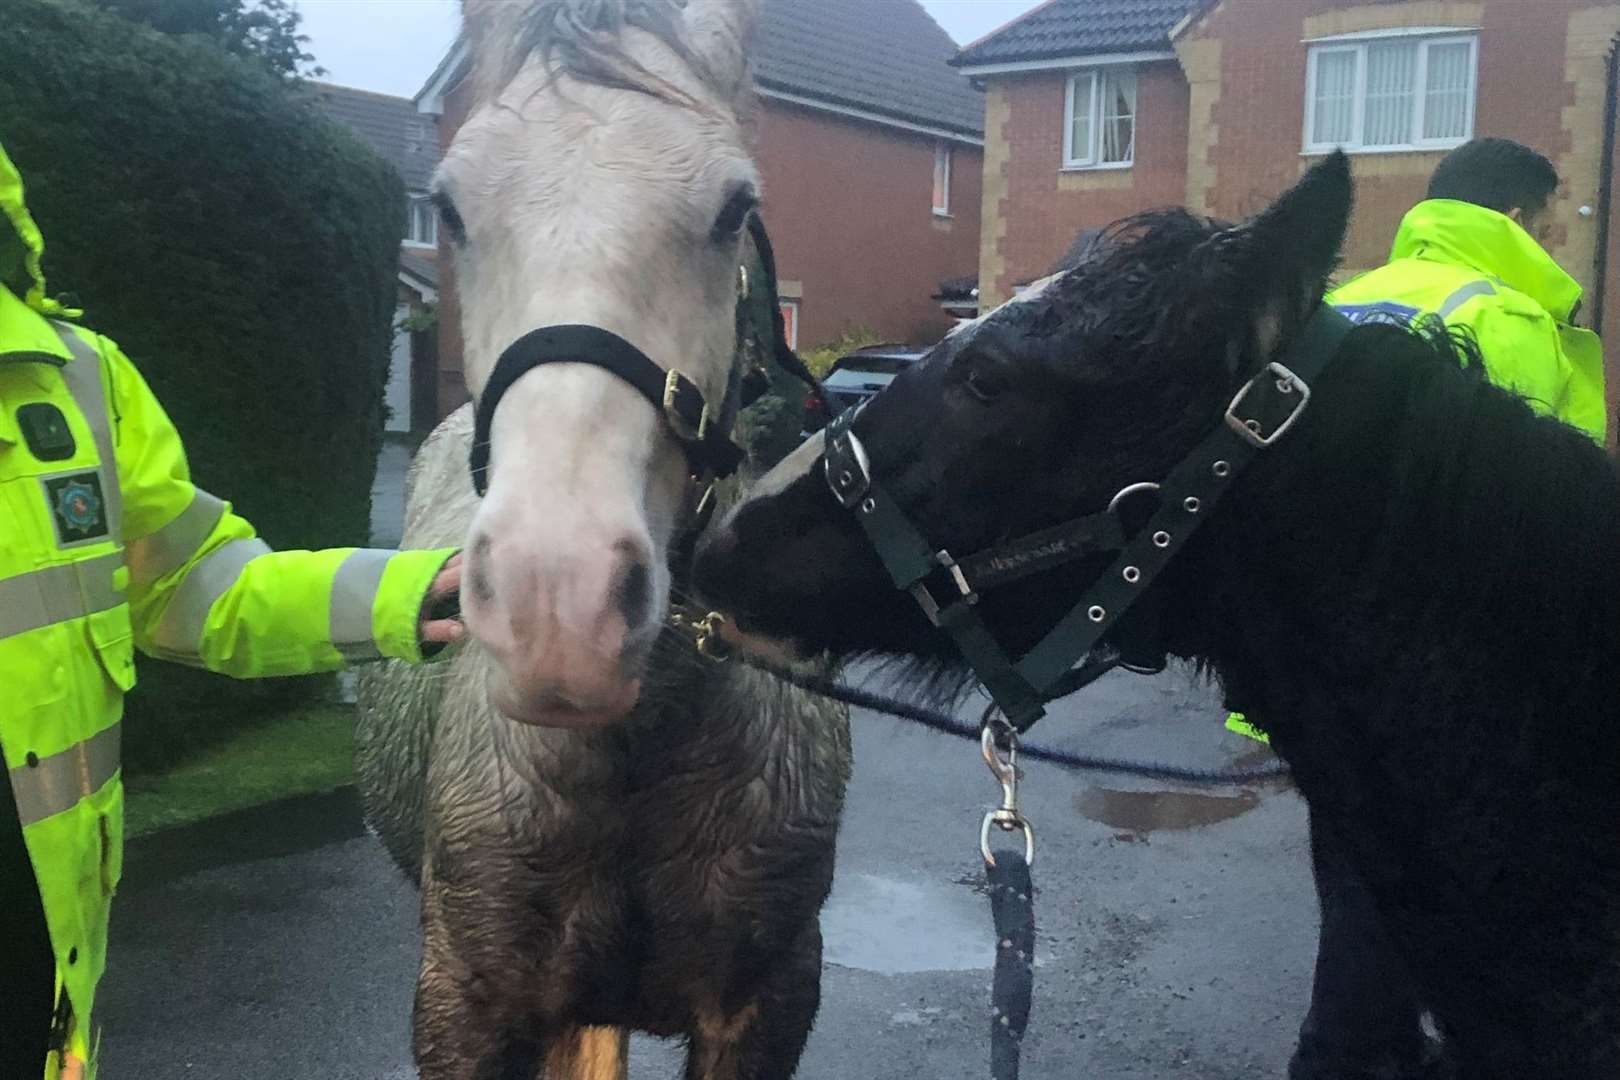 The horses were taken to safety. Photo: Kent Police